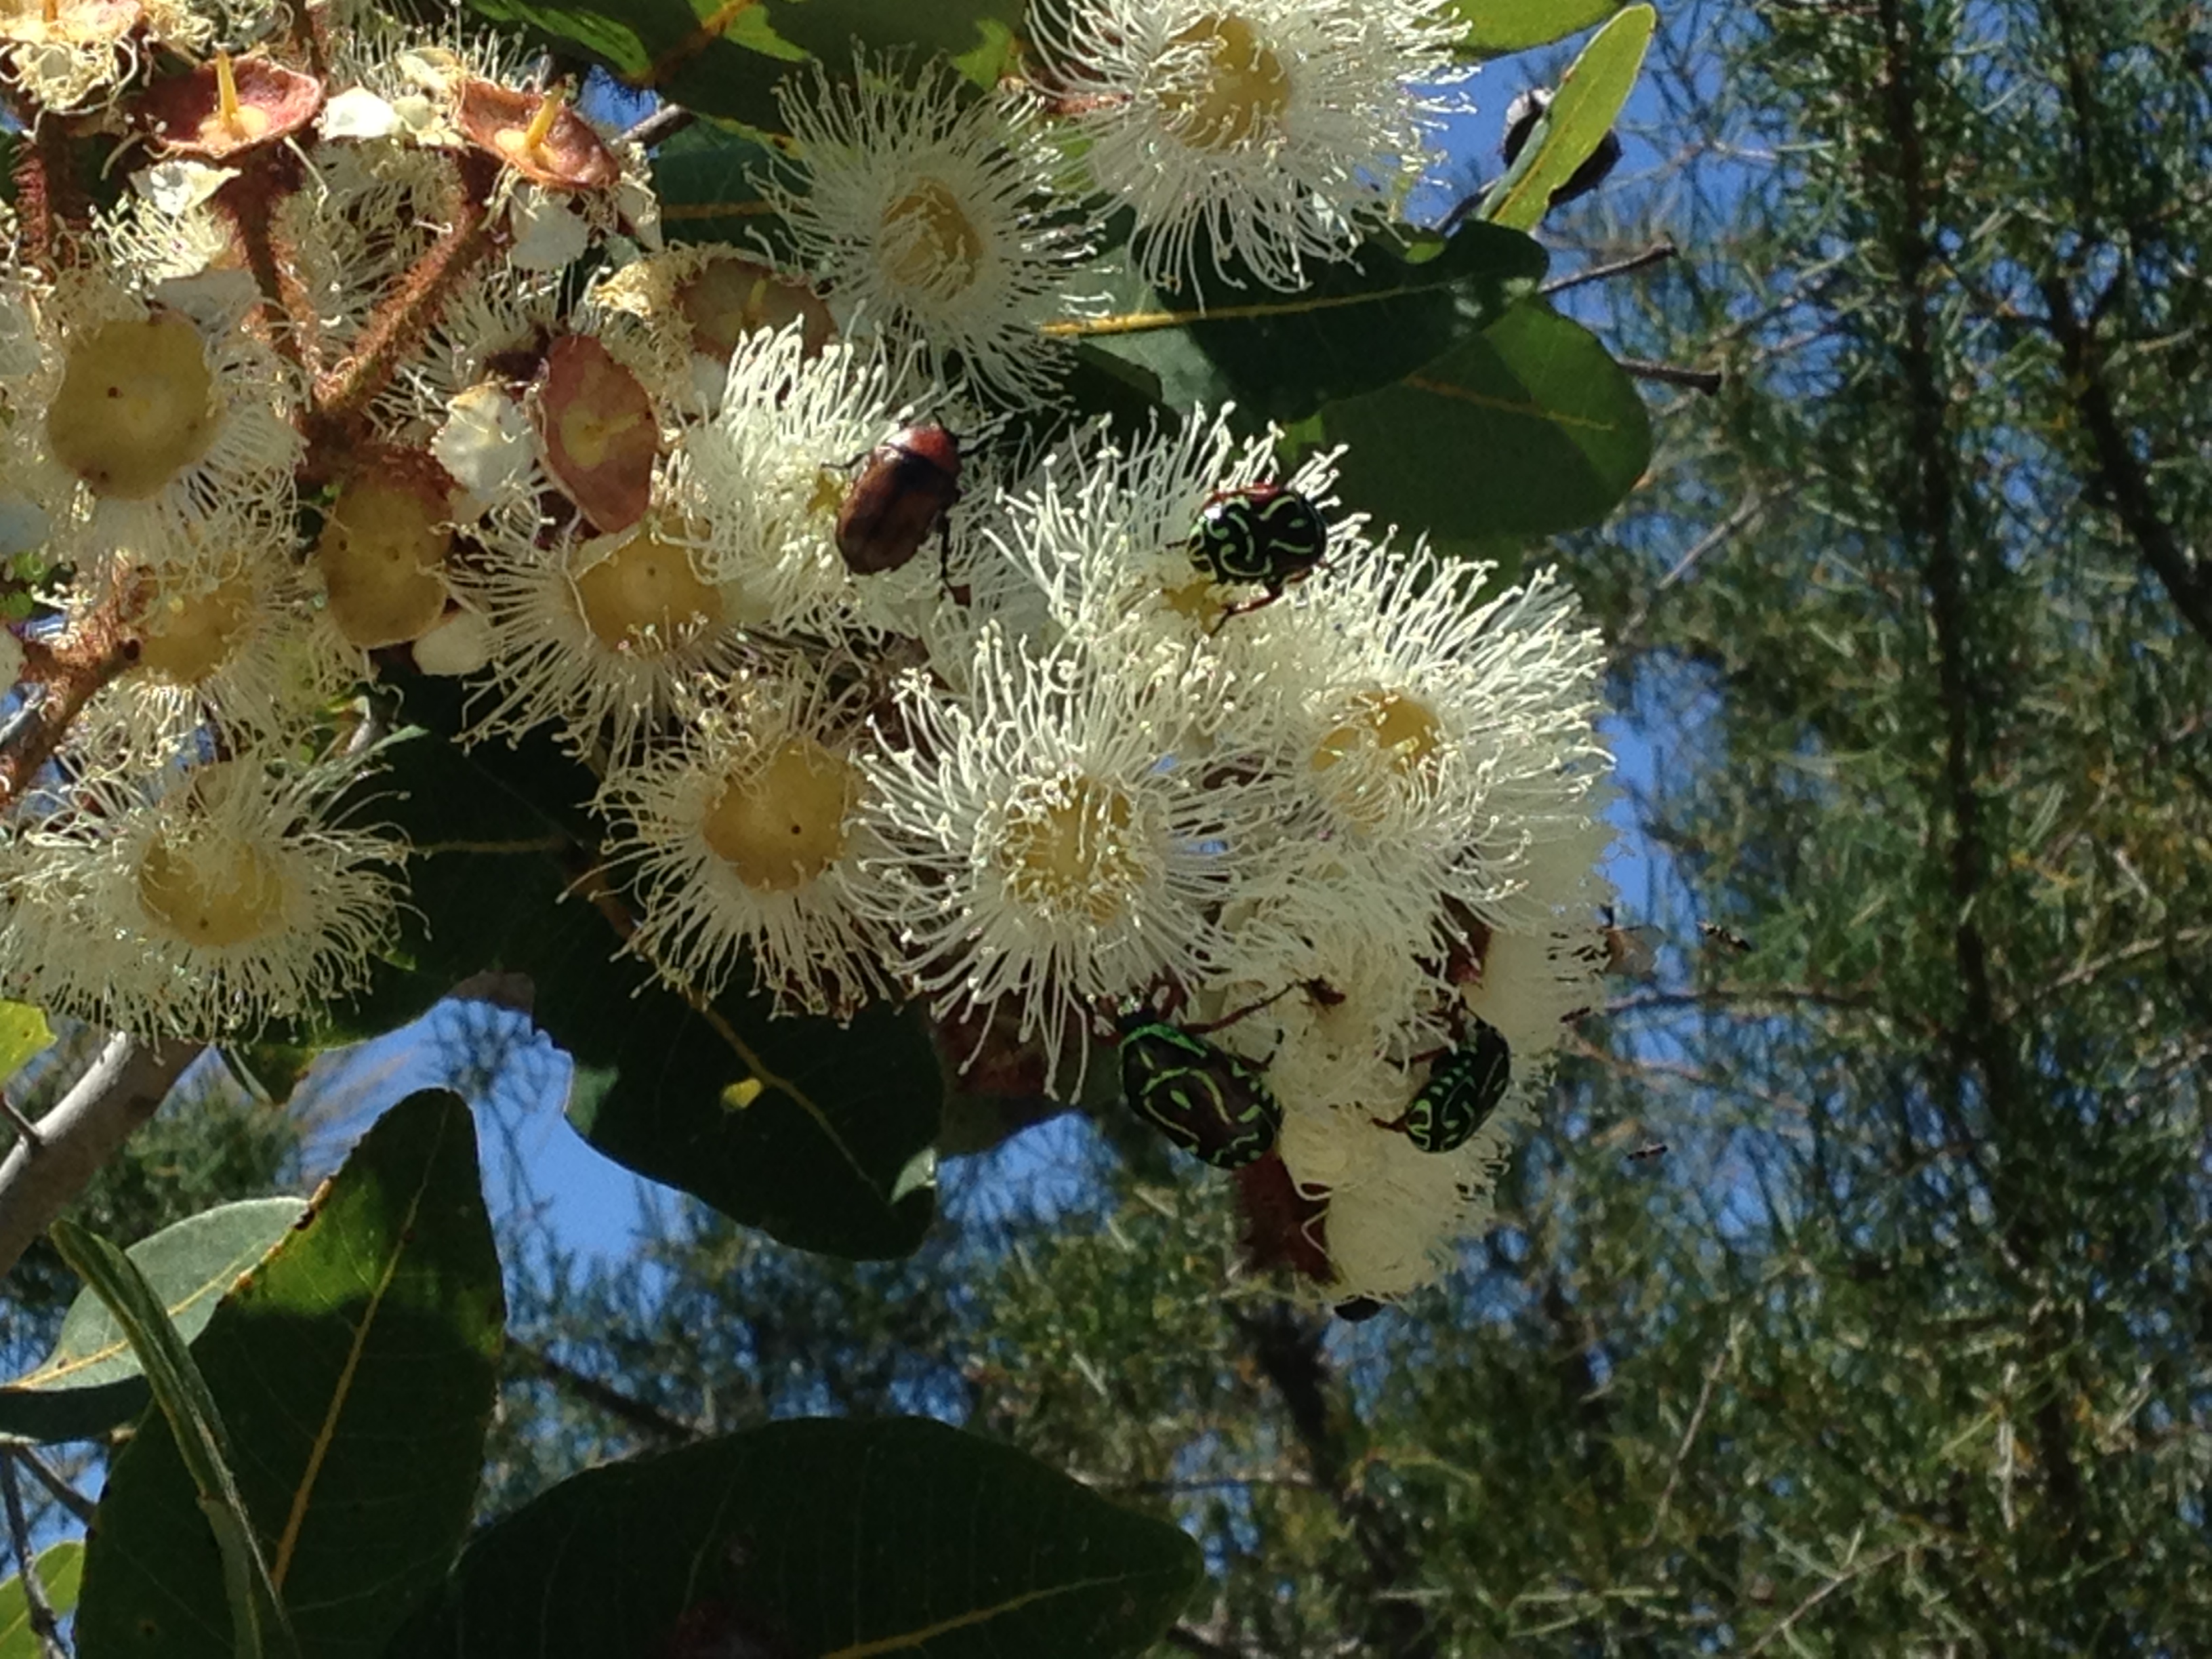 Close up of yellow gum flowers showing beetle crawling on the flowers, presumably eating the nectar.